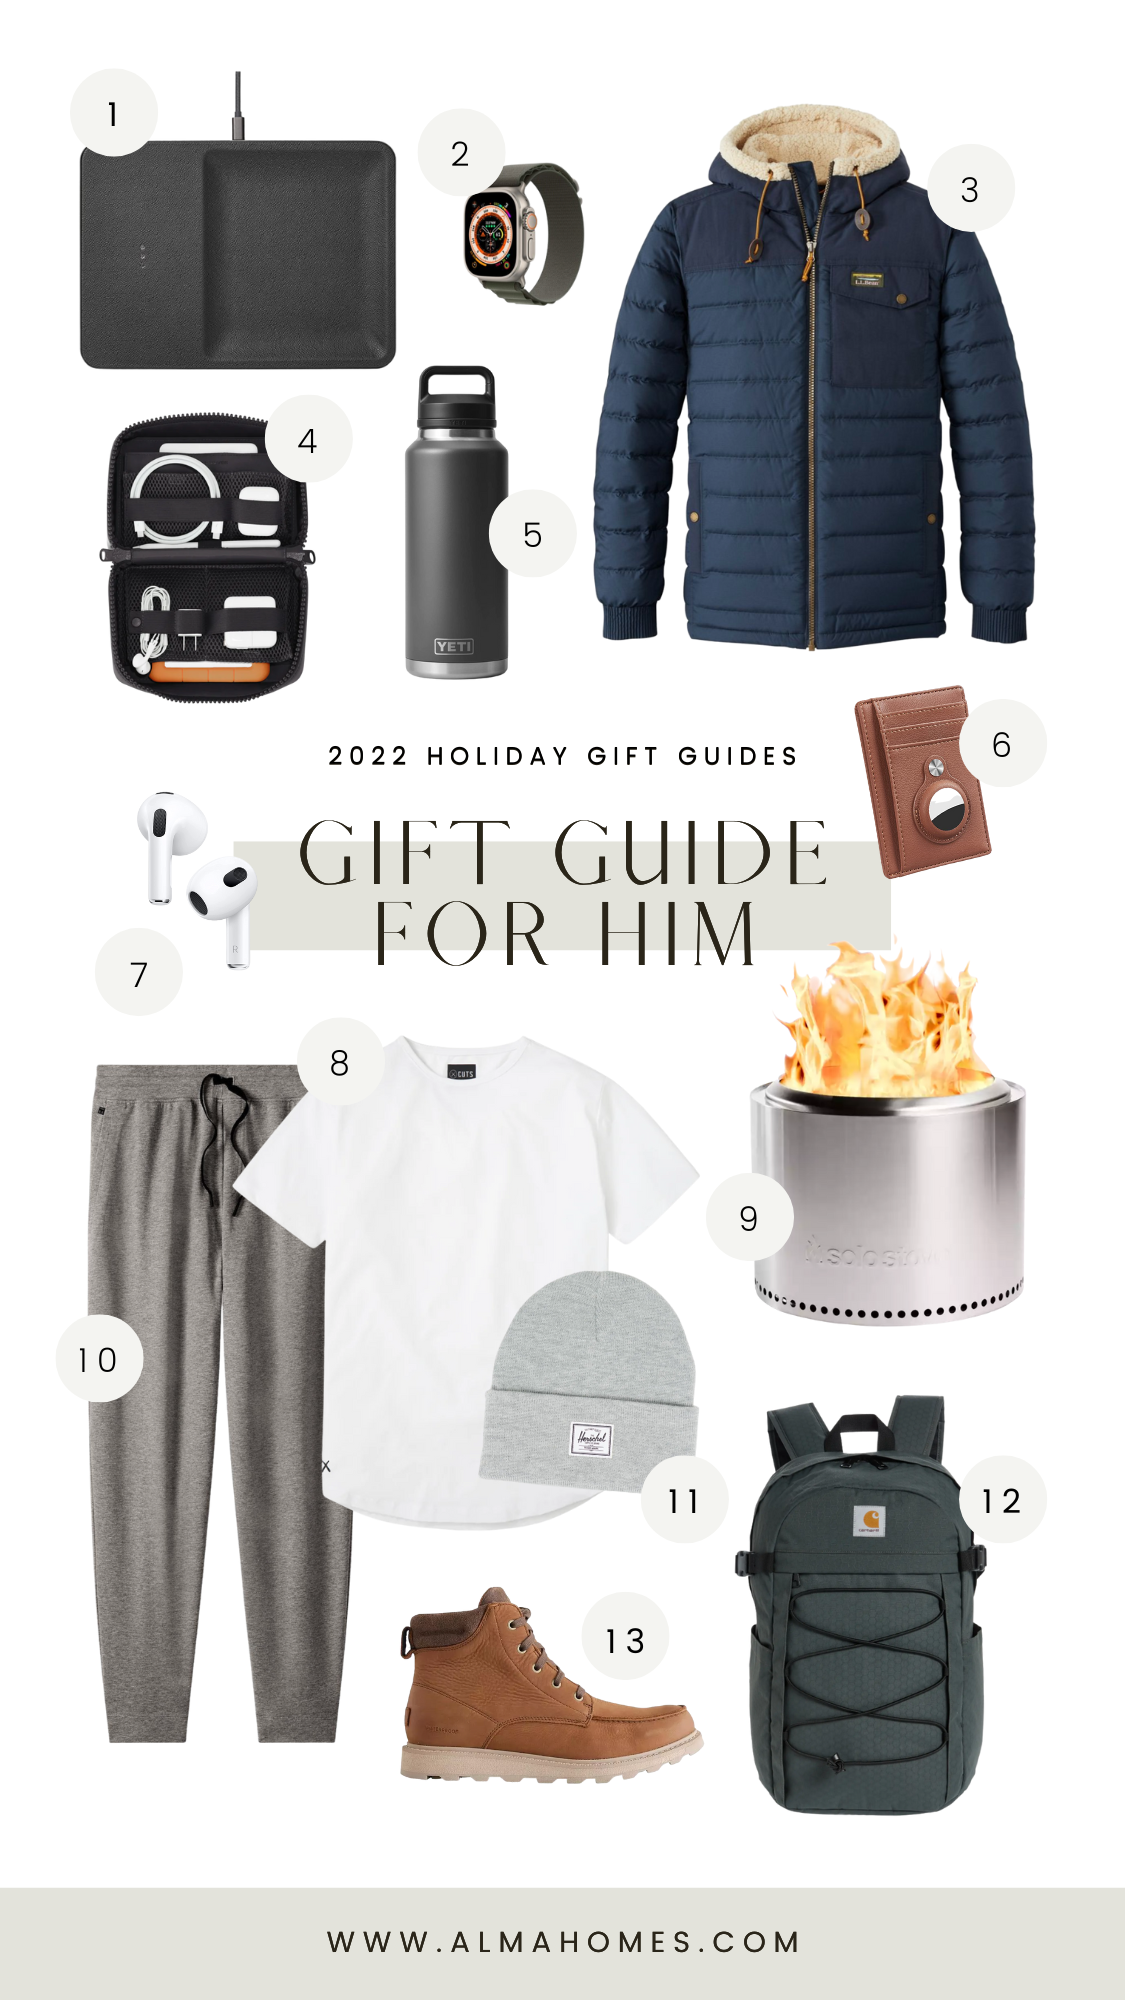 alma-homes-holiday-gift-guide-for-him-2022